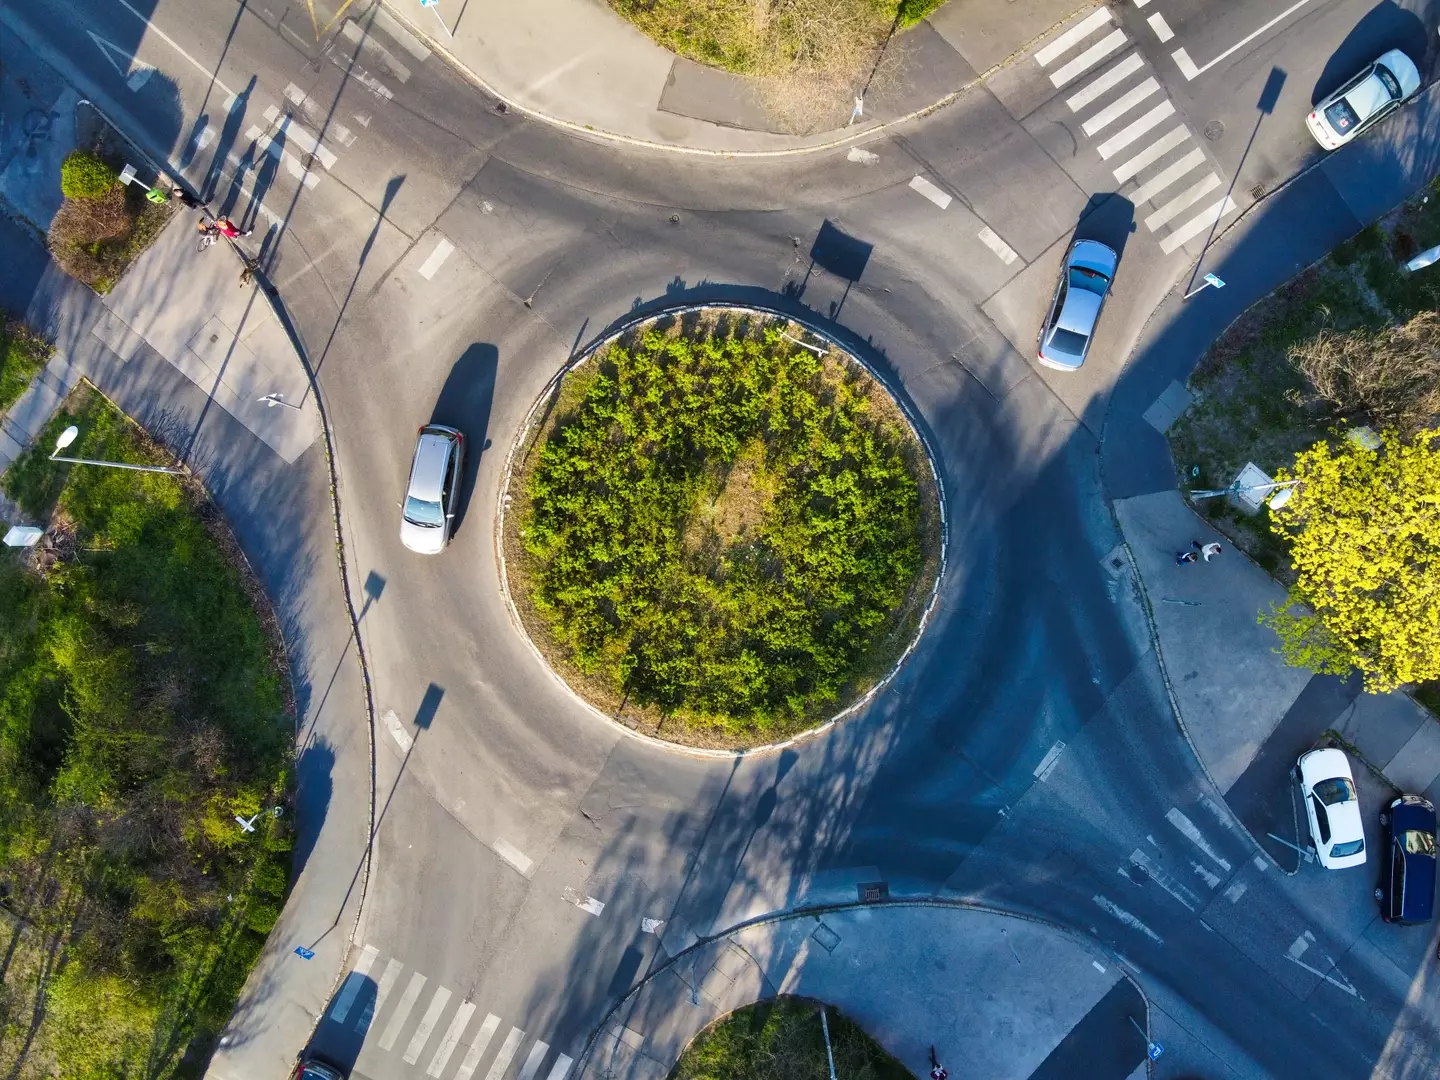 Roundabouts aren't as common in the US as they are in the UK.